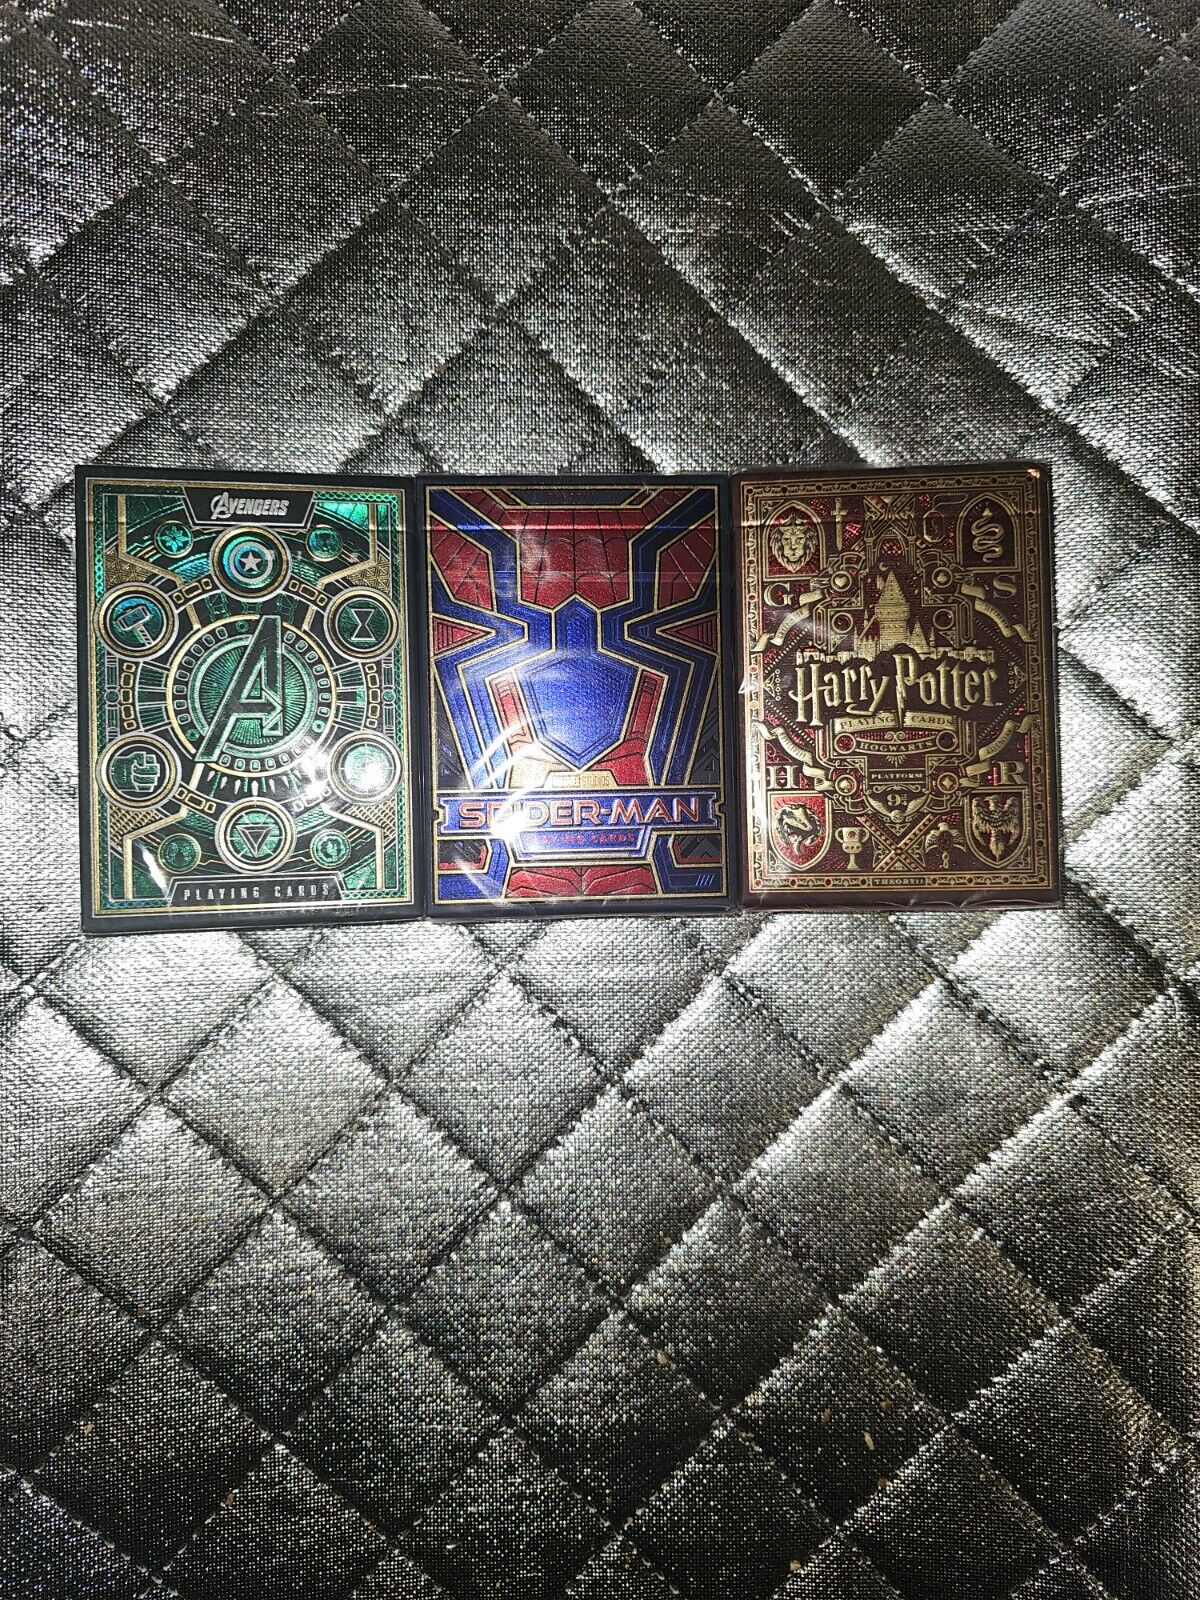 (3) Theory11 Avengers Spider-Man & Harry Potter Playing Cards🔥🔥🔥